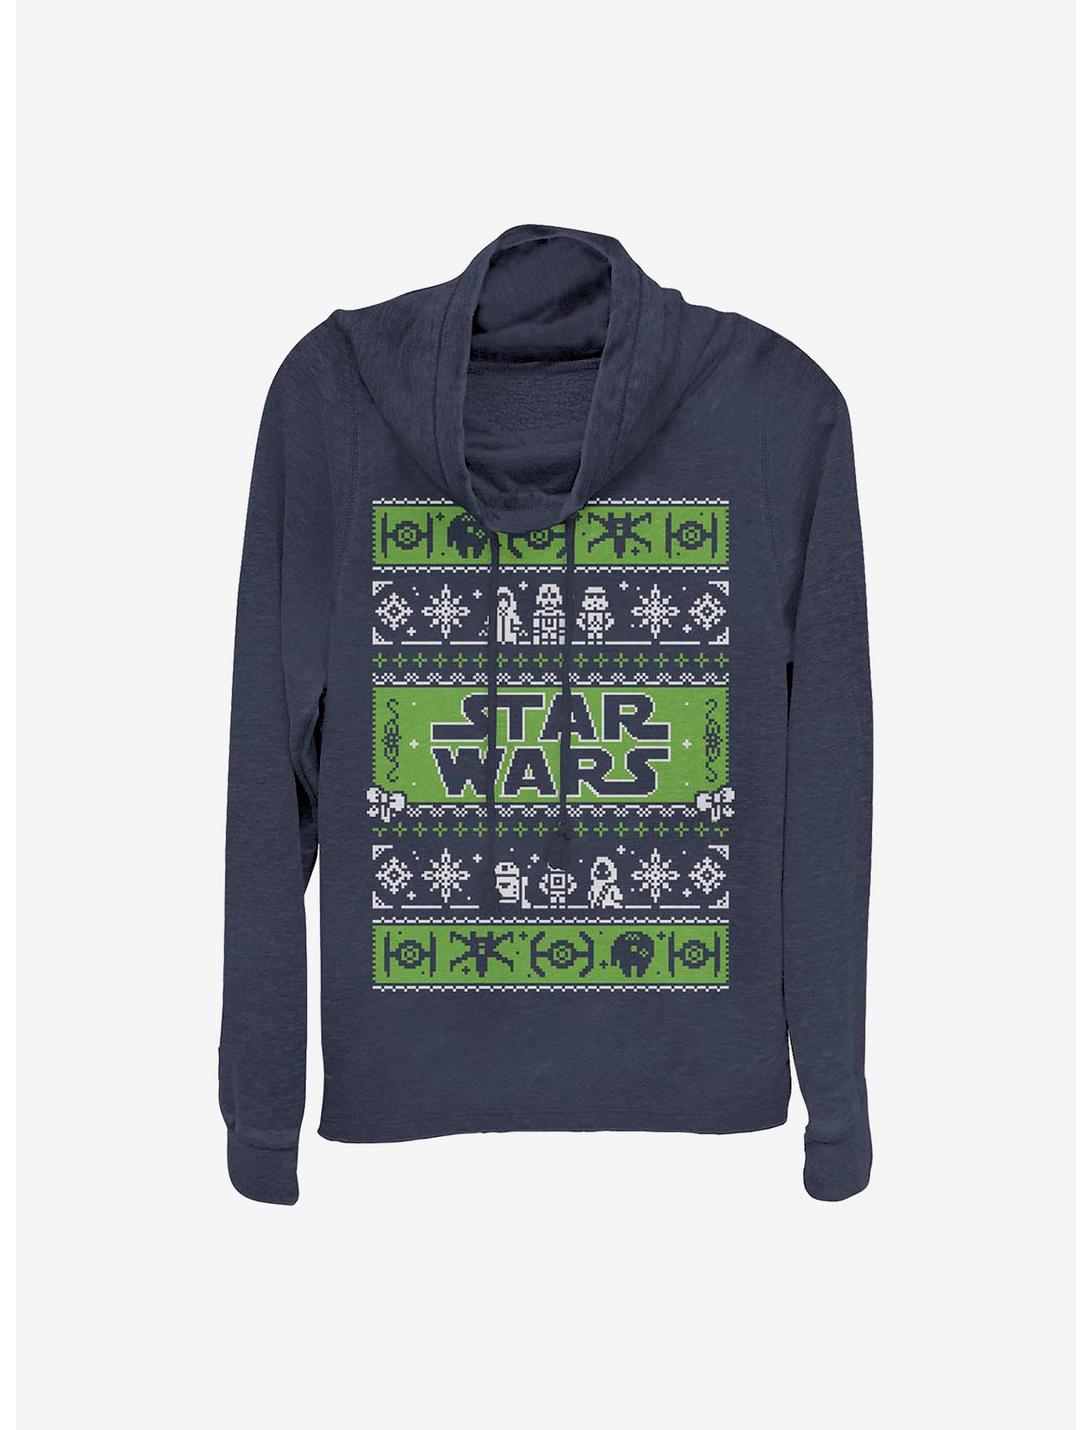 Star Wars Holiday Time Cowlneck Long-Sleeve Girls Top, NAVY, hi-res